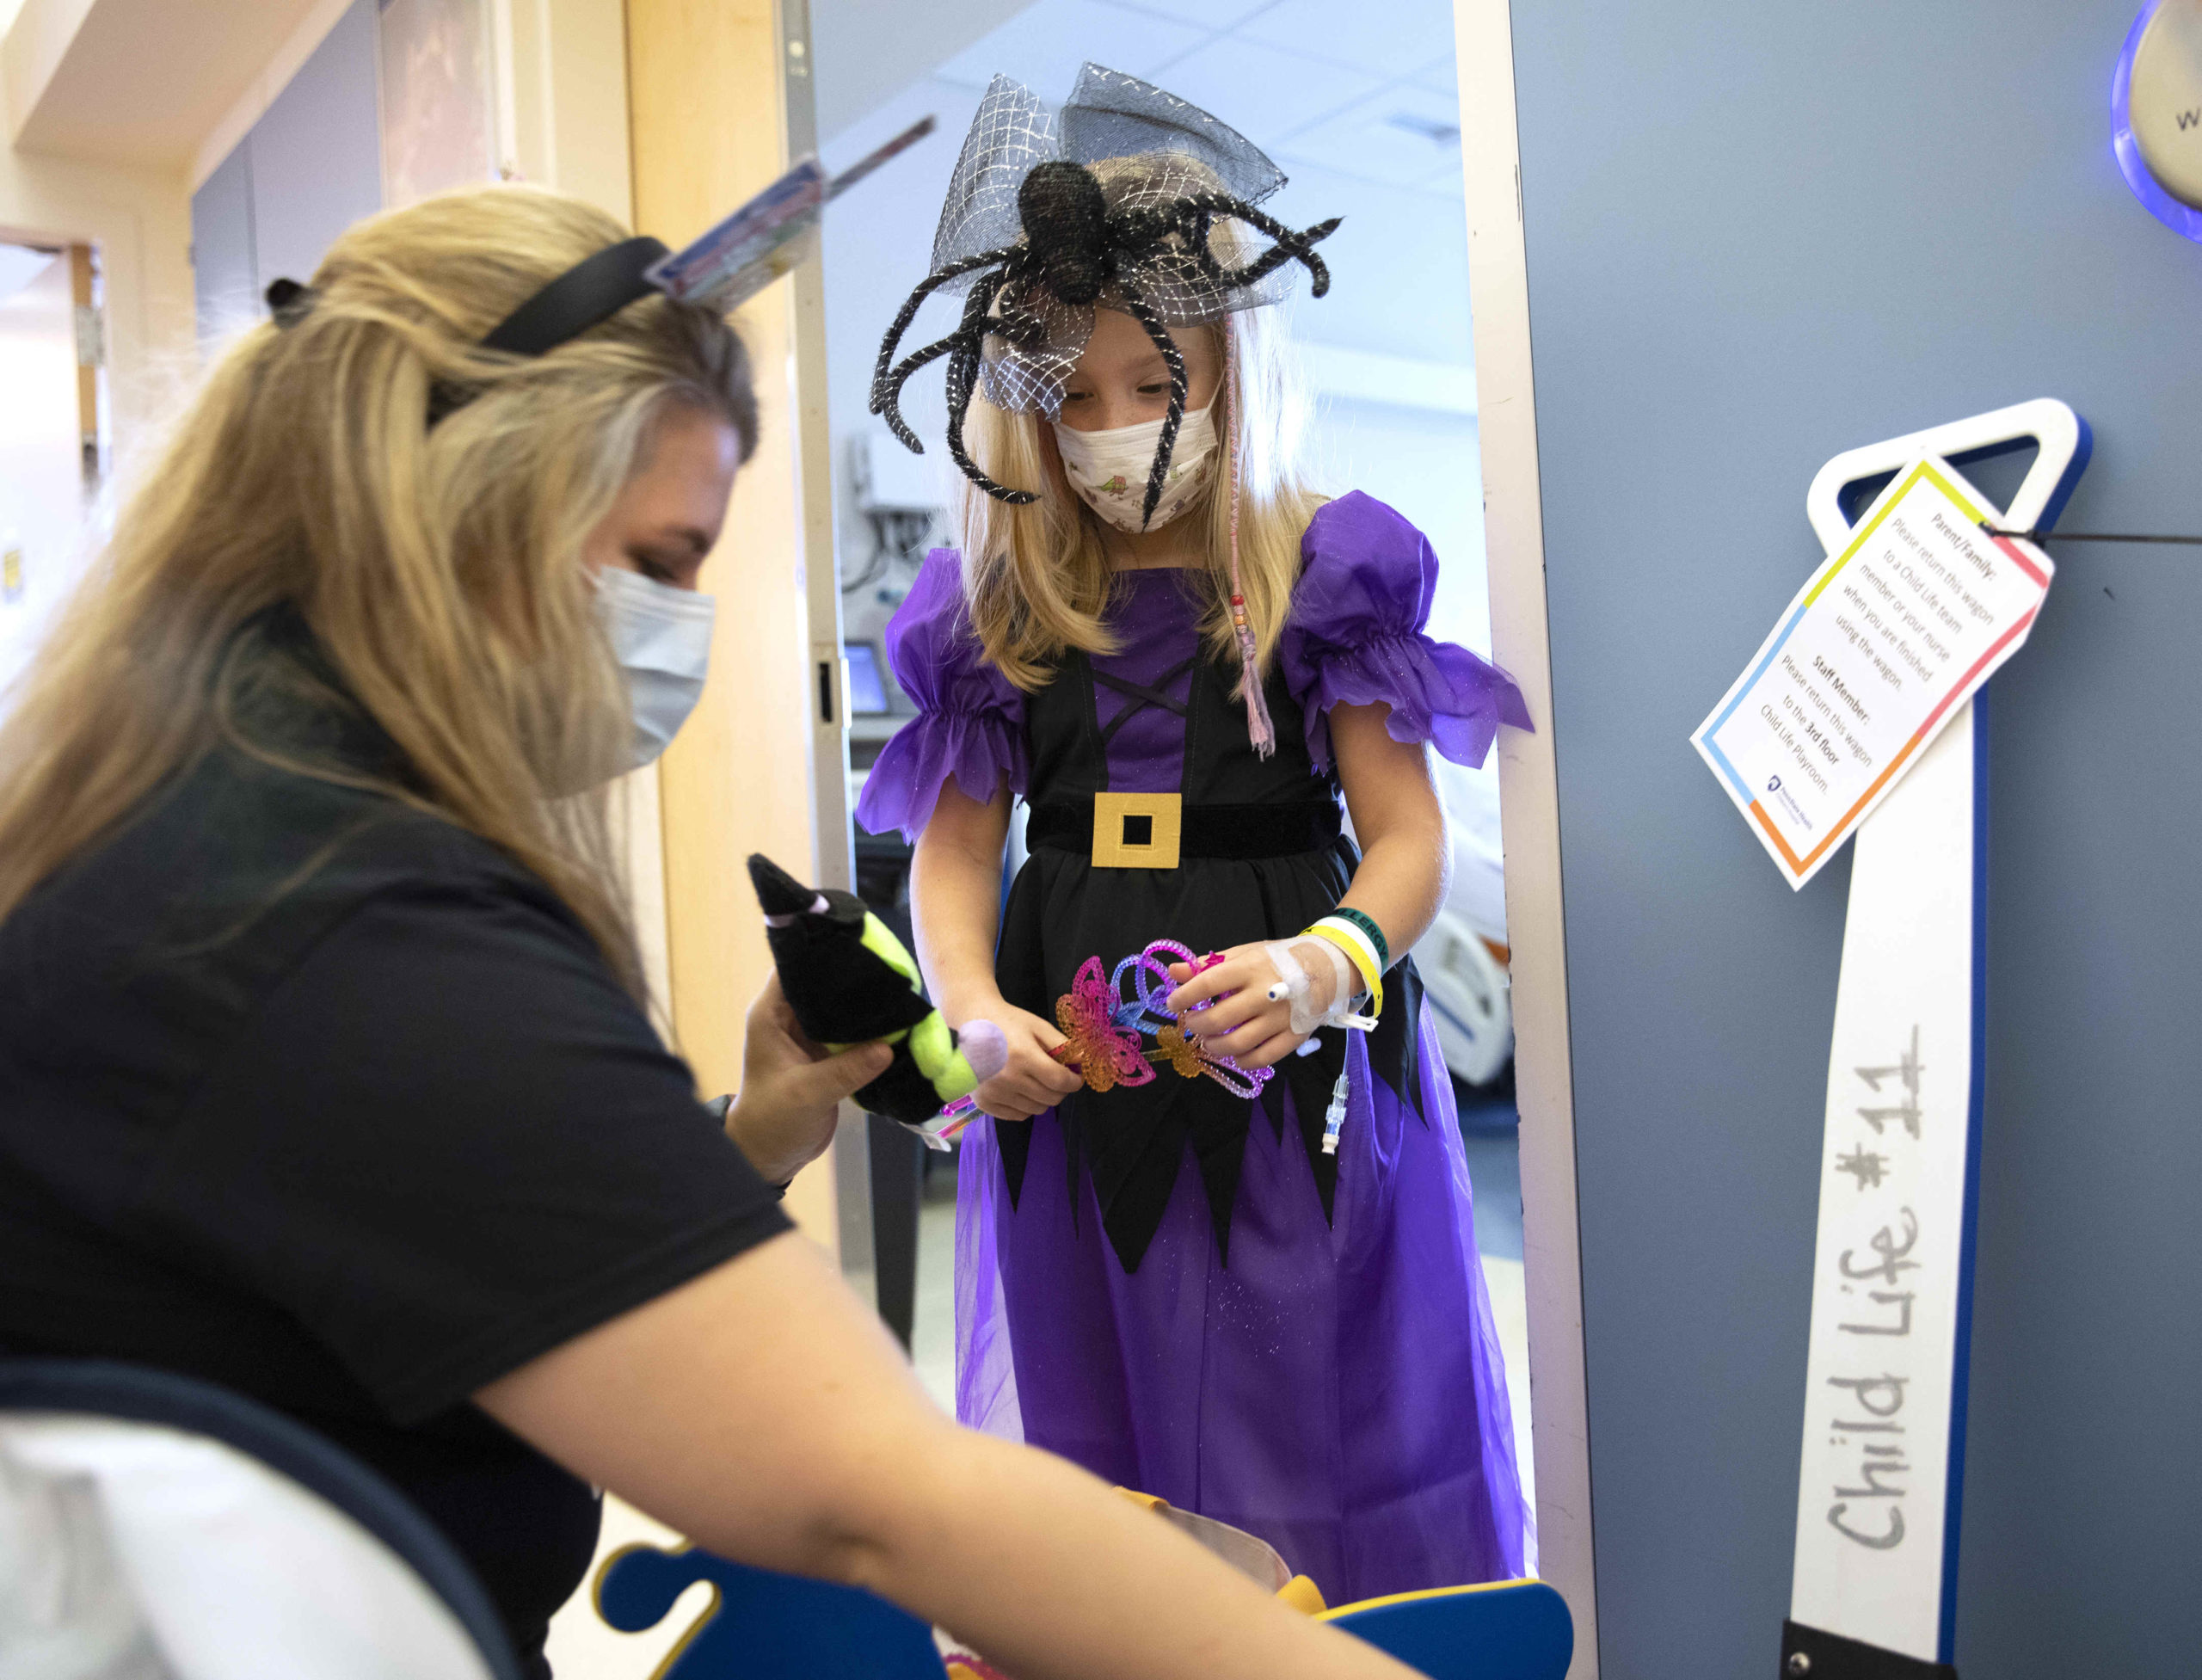 A young girl in a Halloween dress and spider hat stands in the doorway of a hospital room while a woman kneels down near her, holding up a doll-like toy.